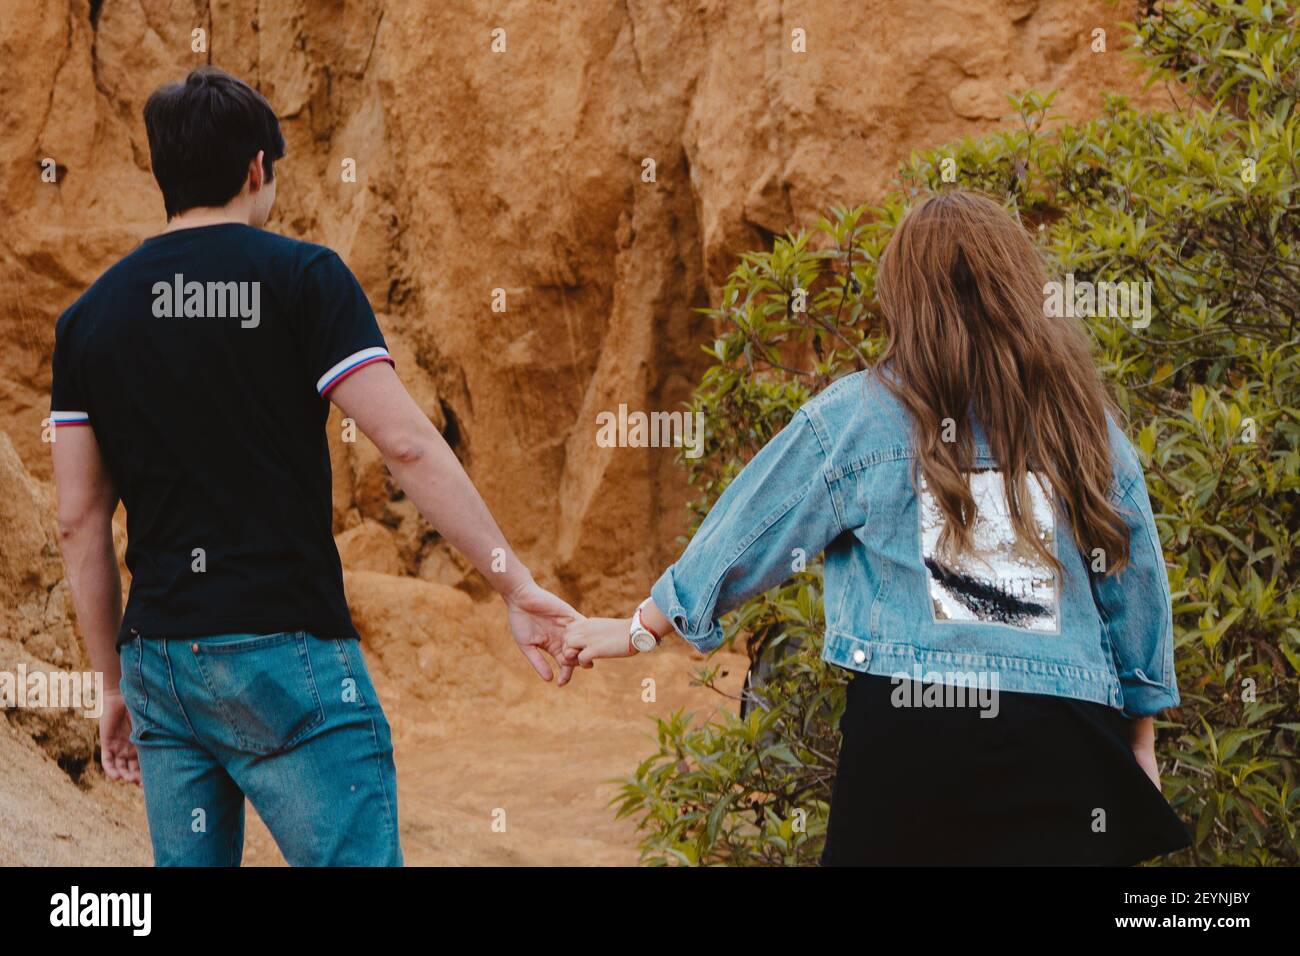 A back view of a couple holding hands at the Sabrinsky desert in Colombia Stock Photo